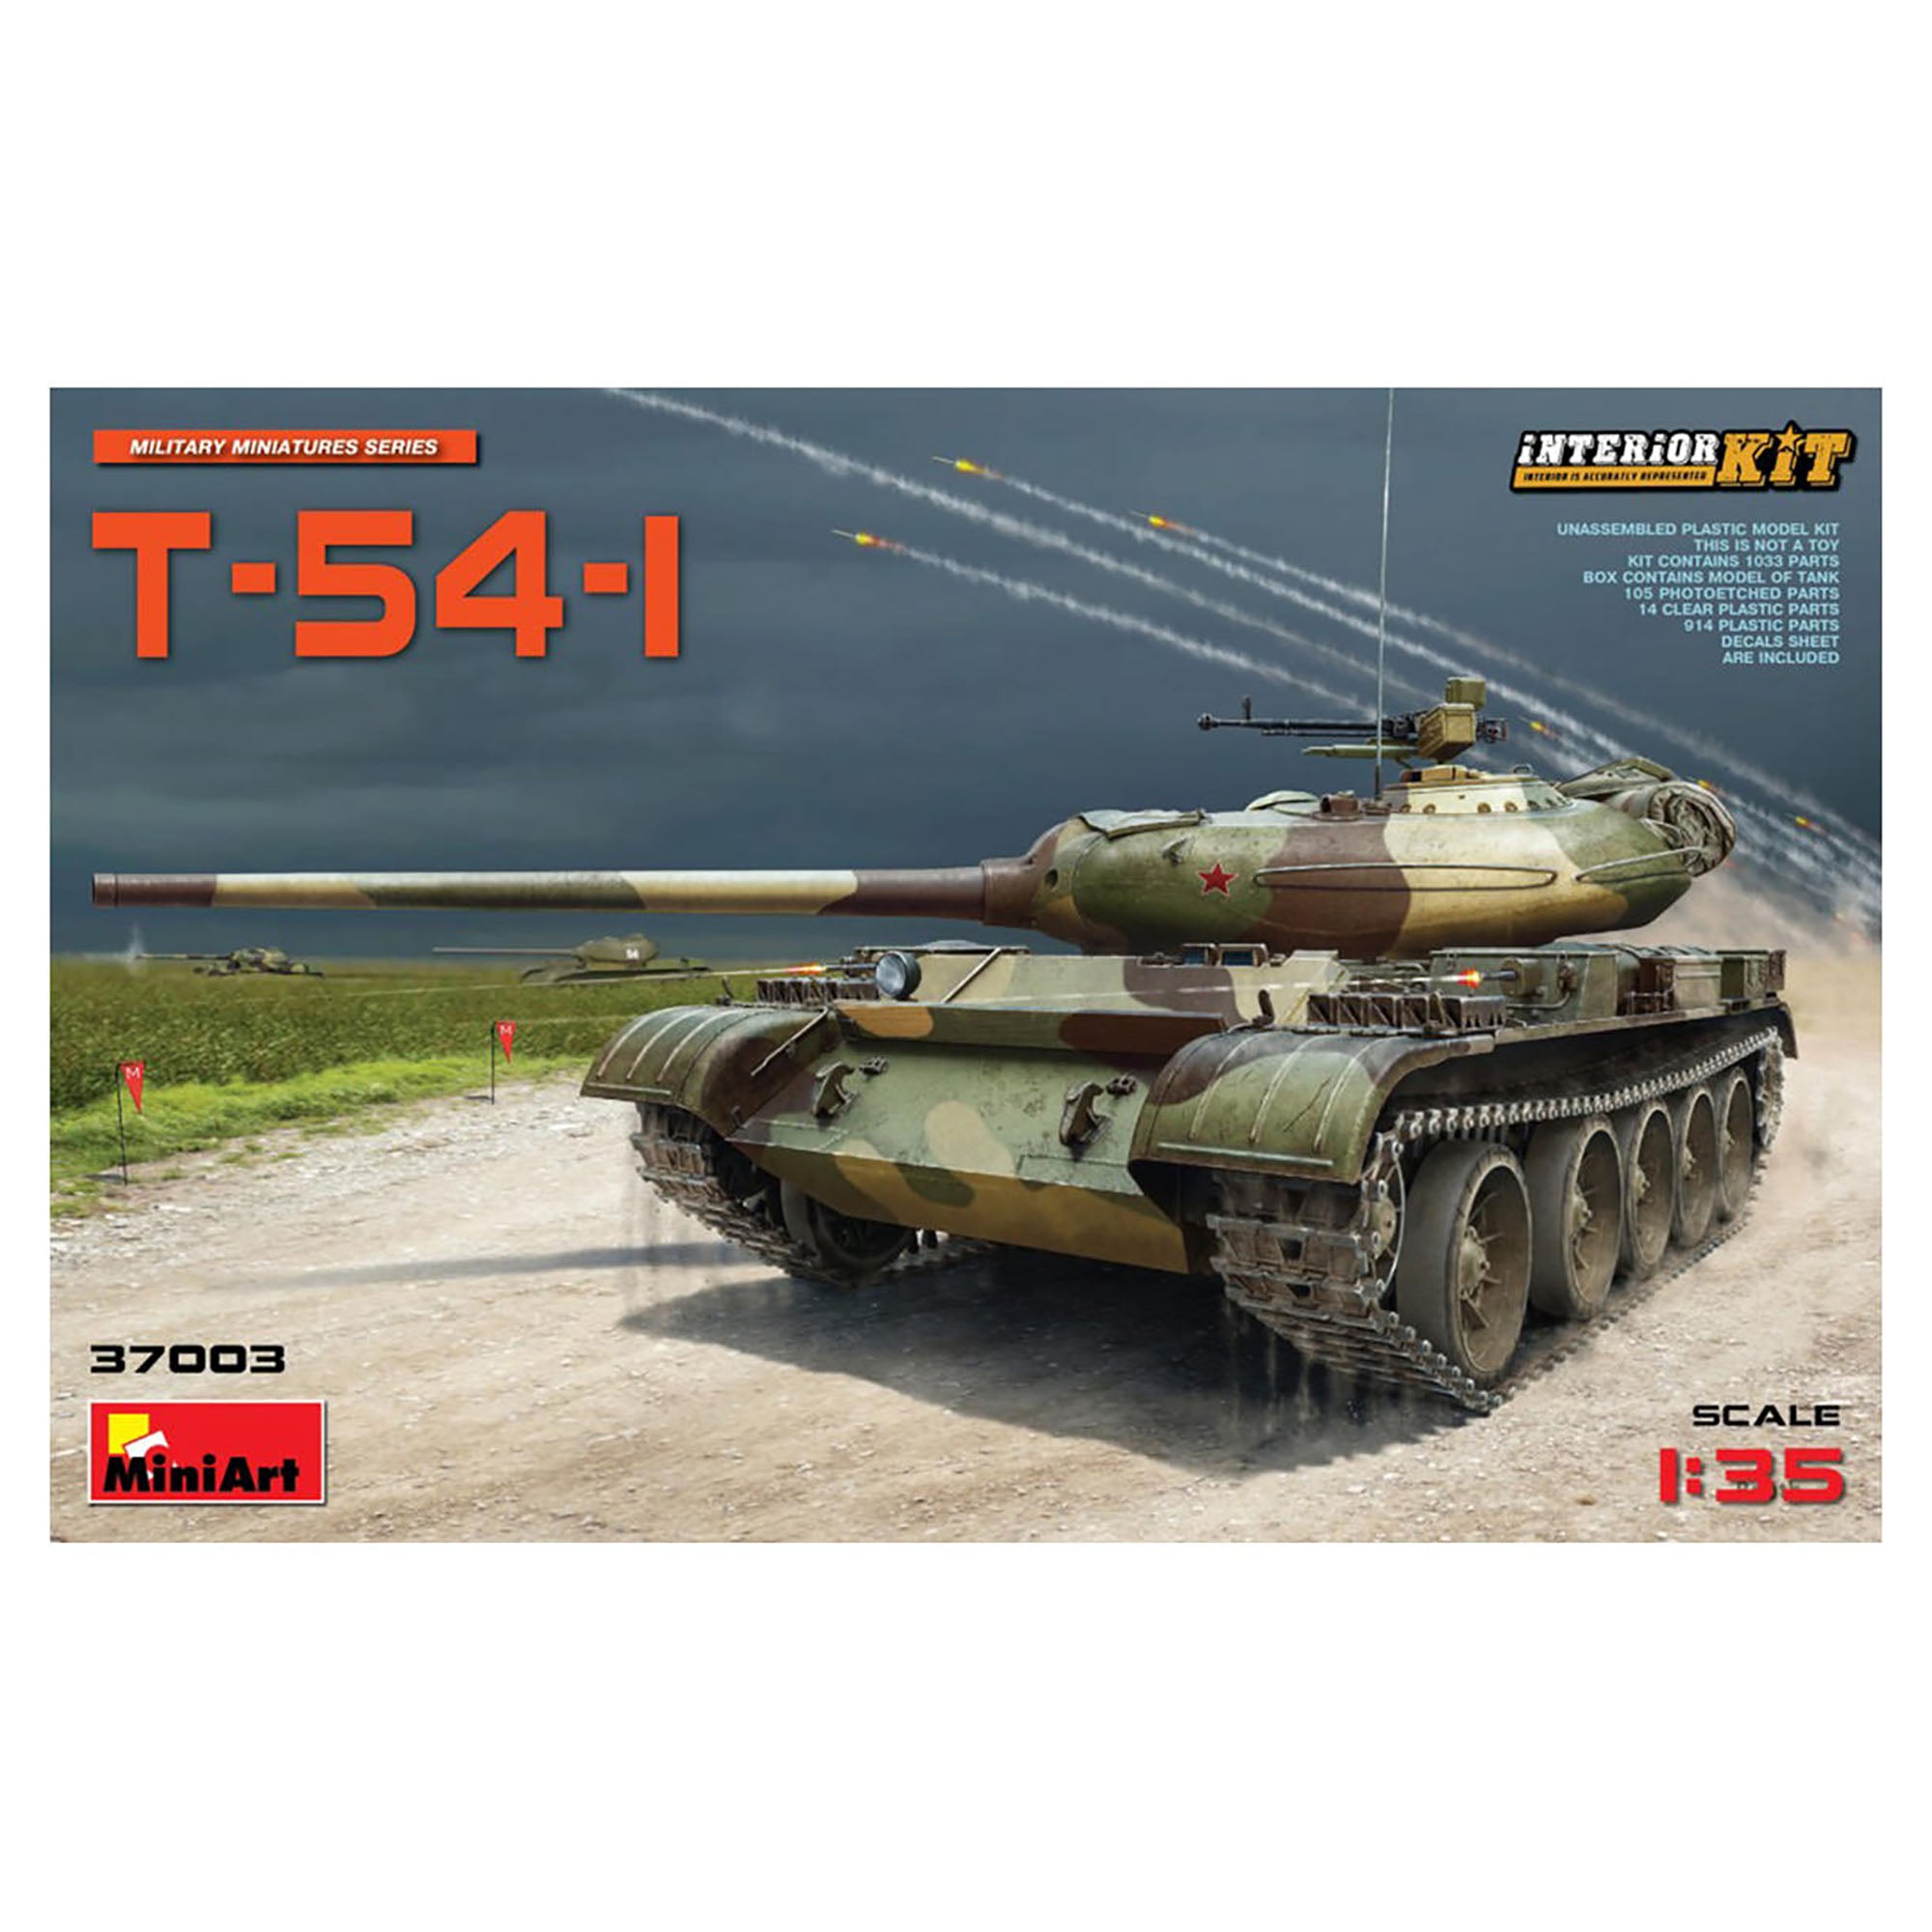 MiniArt 37003 1/35 T-54-1 with Interior Model Kit